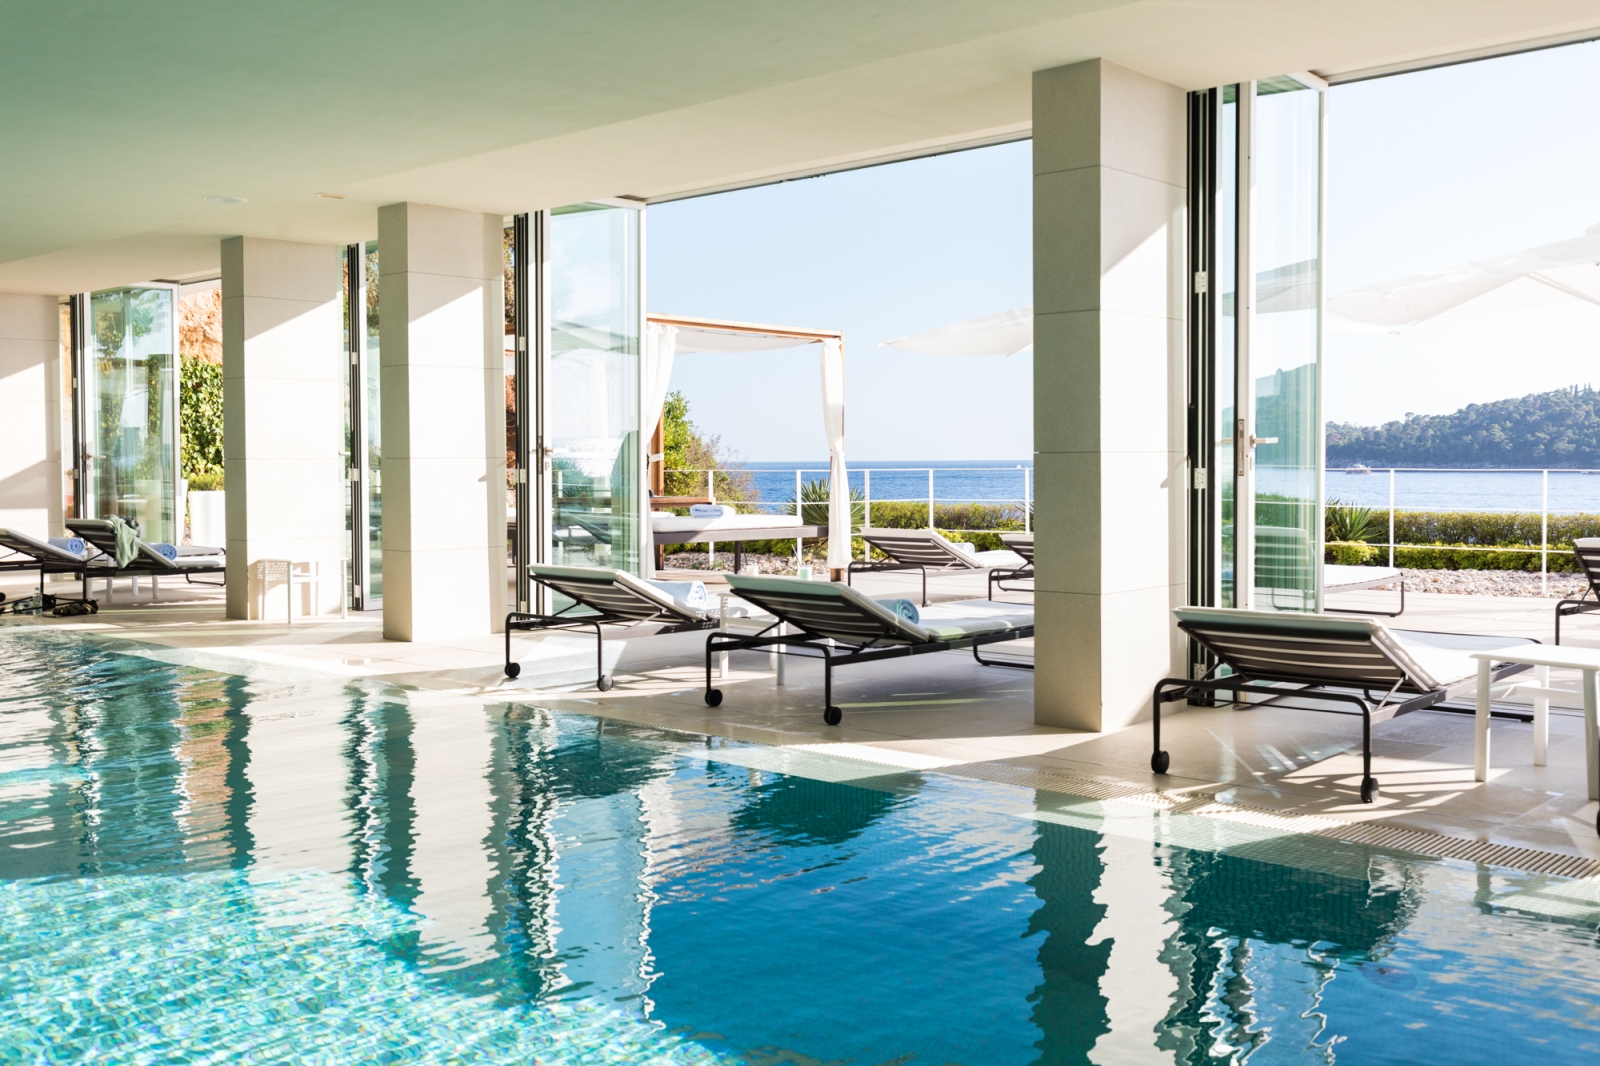 Indoor swimming pool with sun loungers and floor-to-ceiling windows overlooking the Mediterranean Sea at luxury hotel Villa Dubrovnik in Croatia